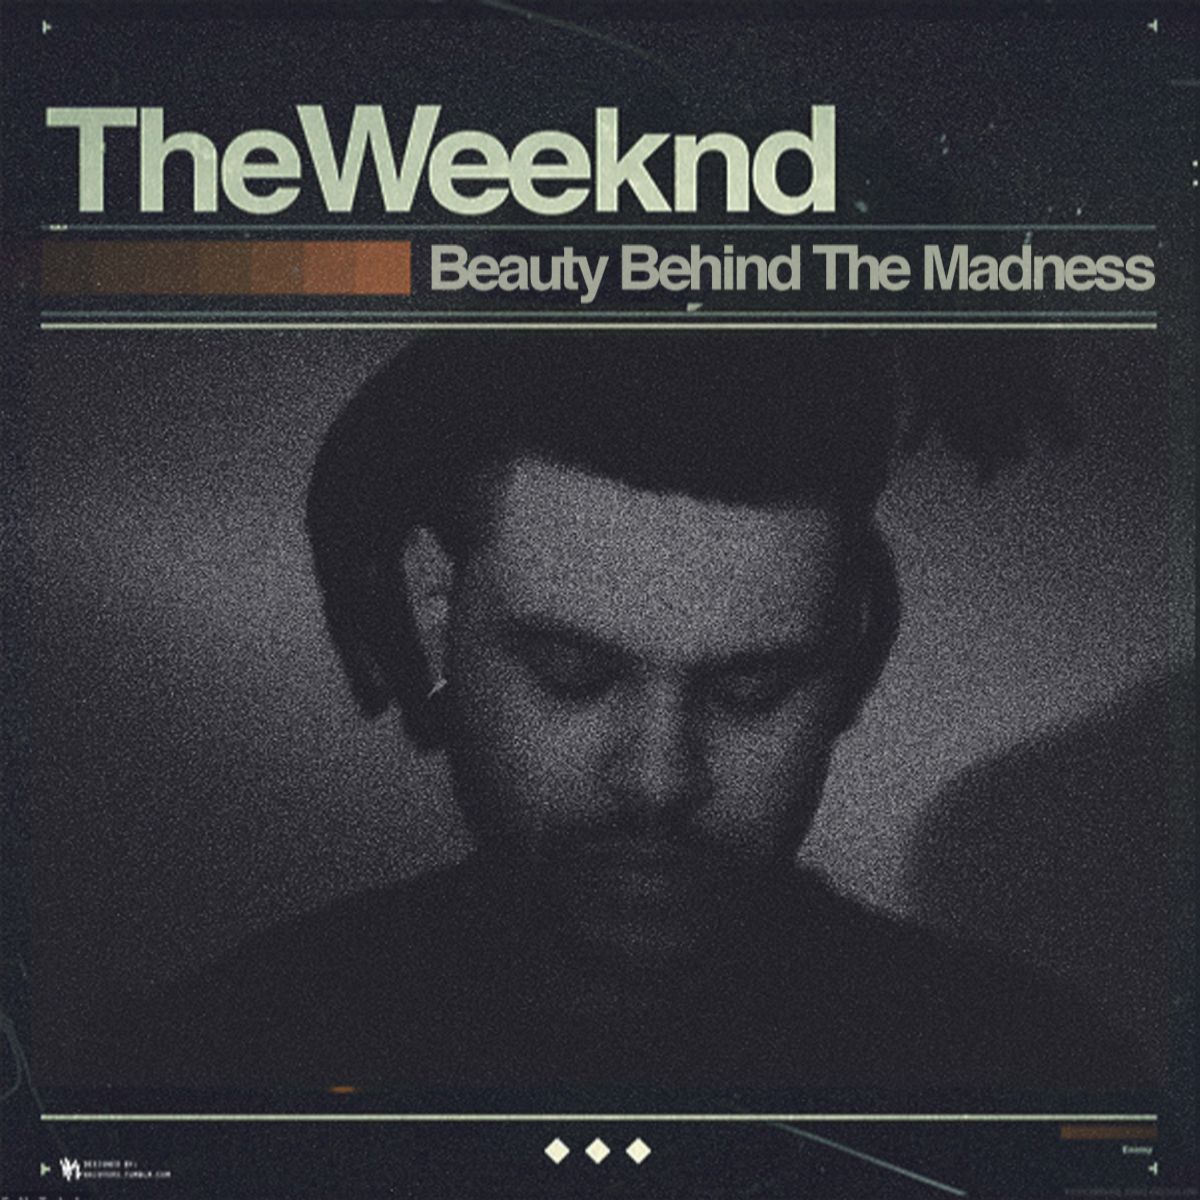 The Weeknd Behind The Madness .imgur.com